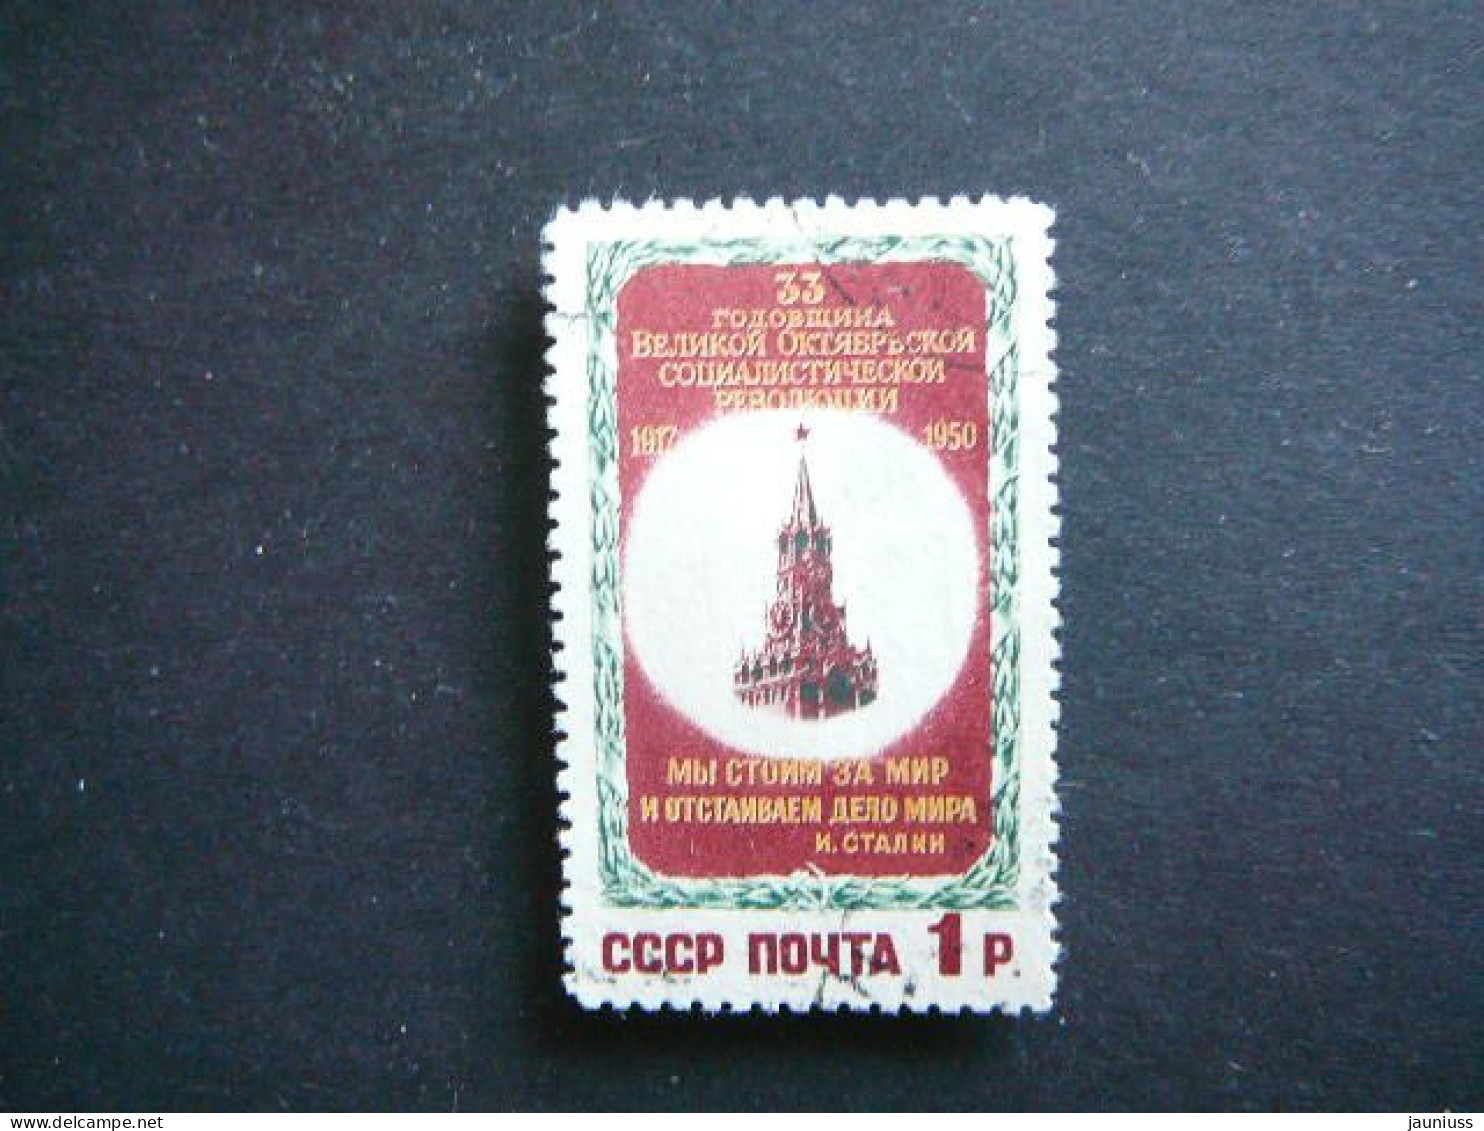 October Revolution Spasski Tower # Russia USSR Sowjetunion # 1950 Used #Mi.1521 - Used Stamps